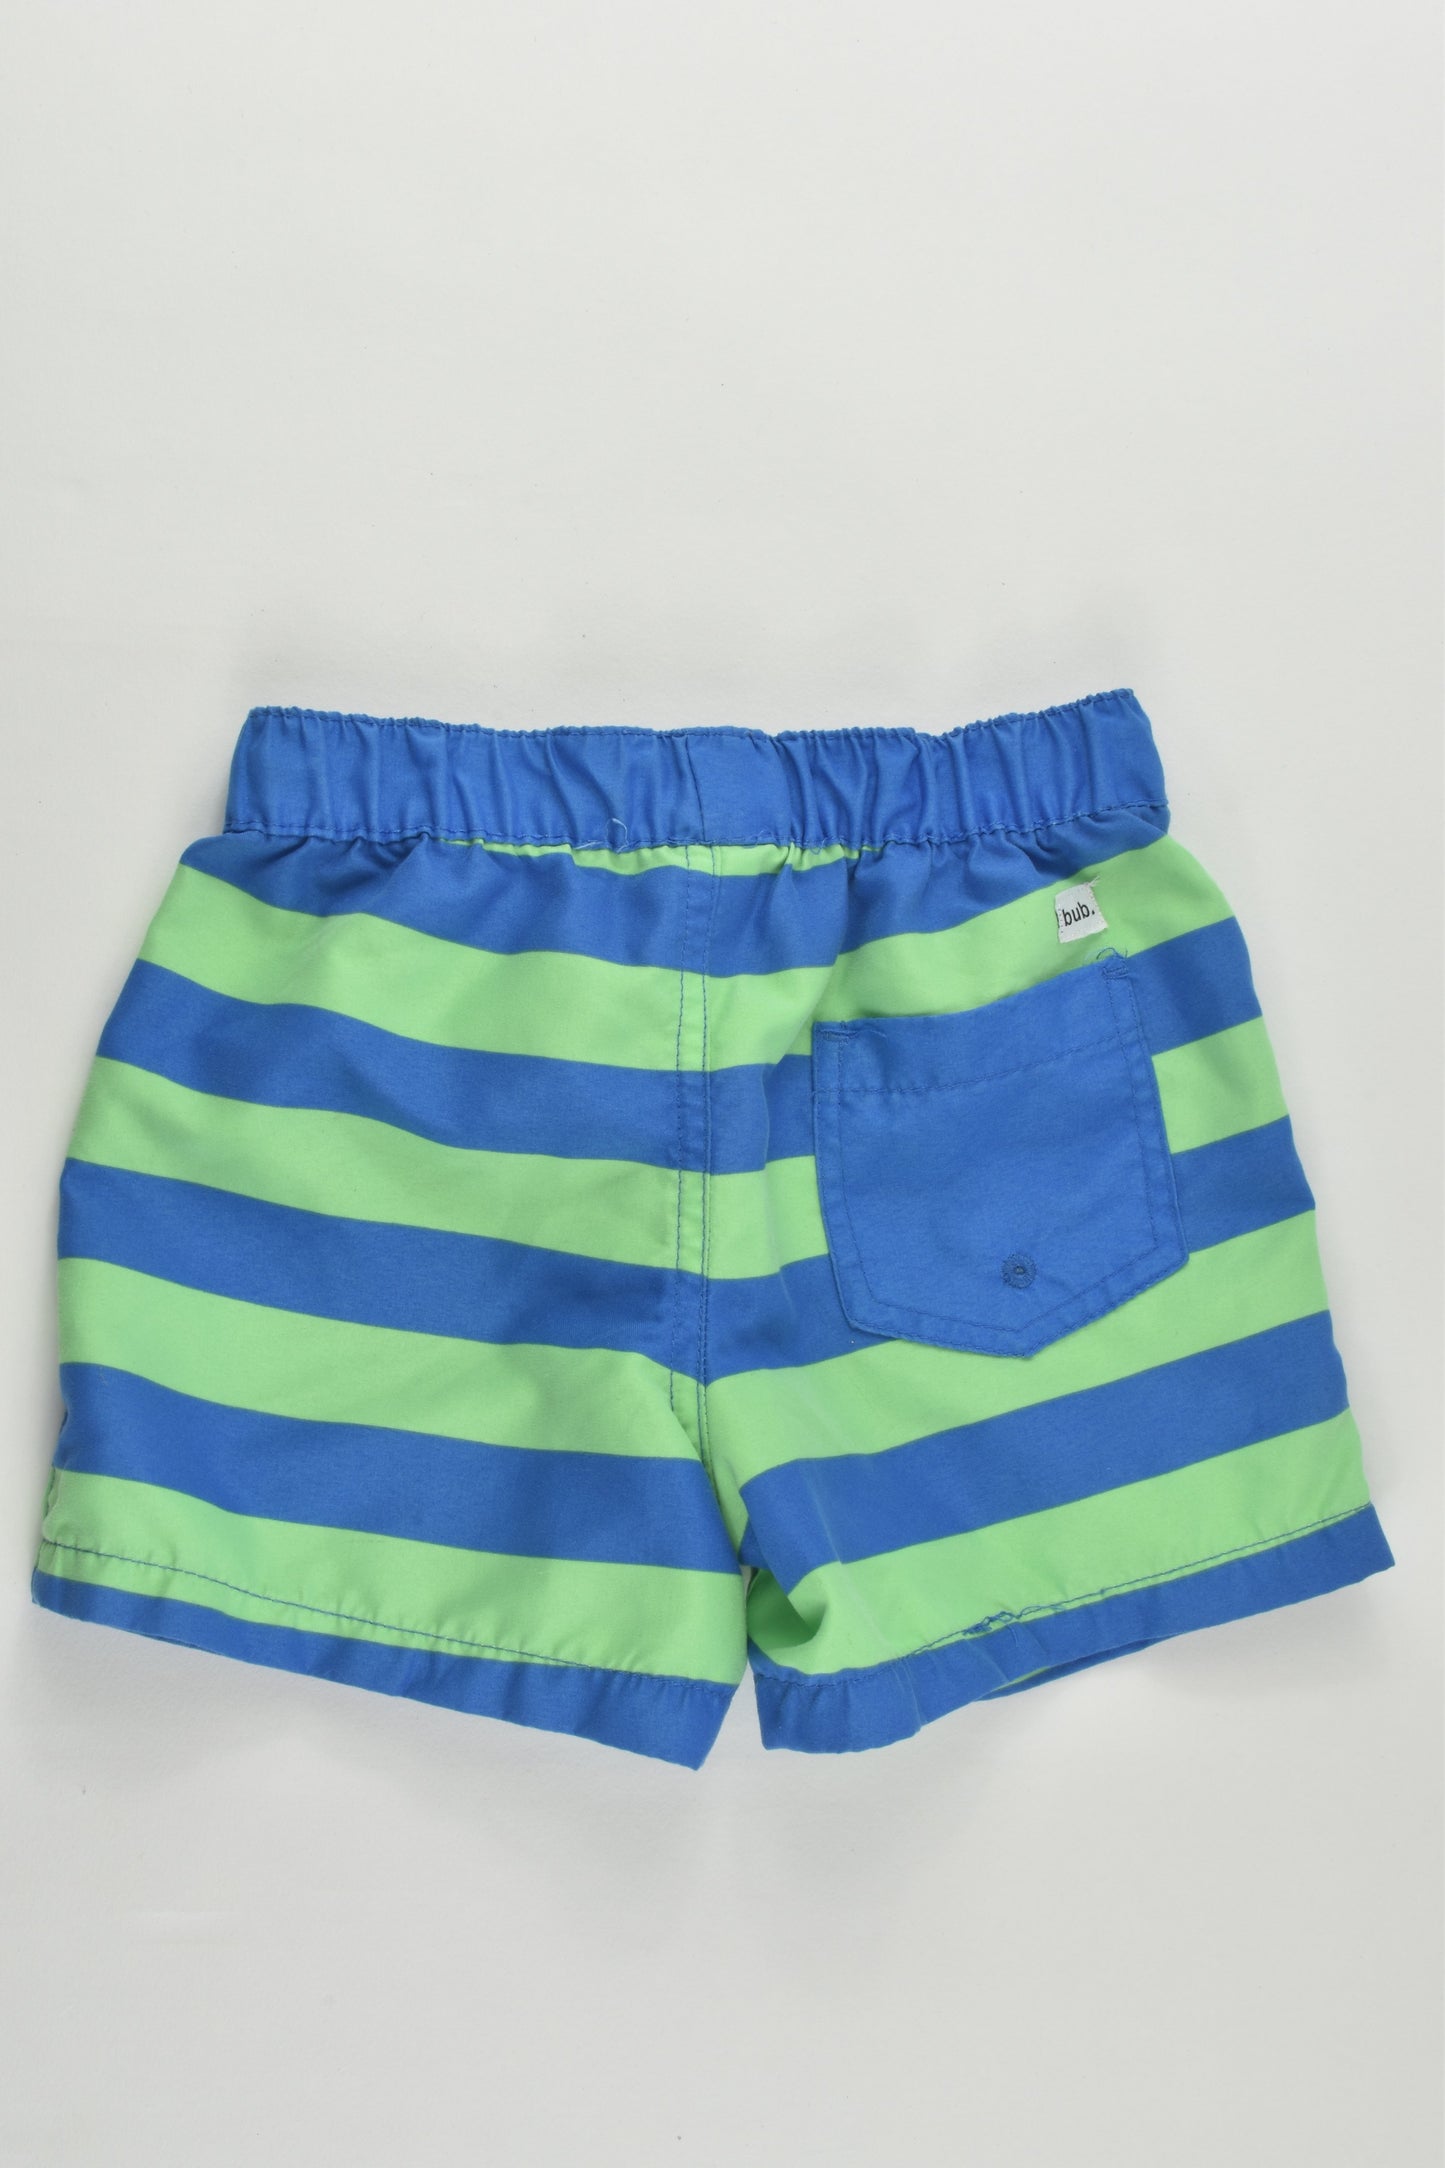 Target Size 1 Striped Board Shorts